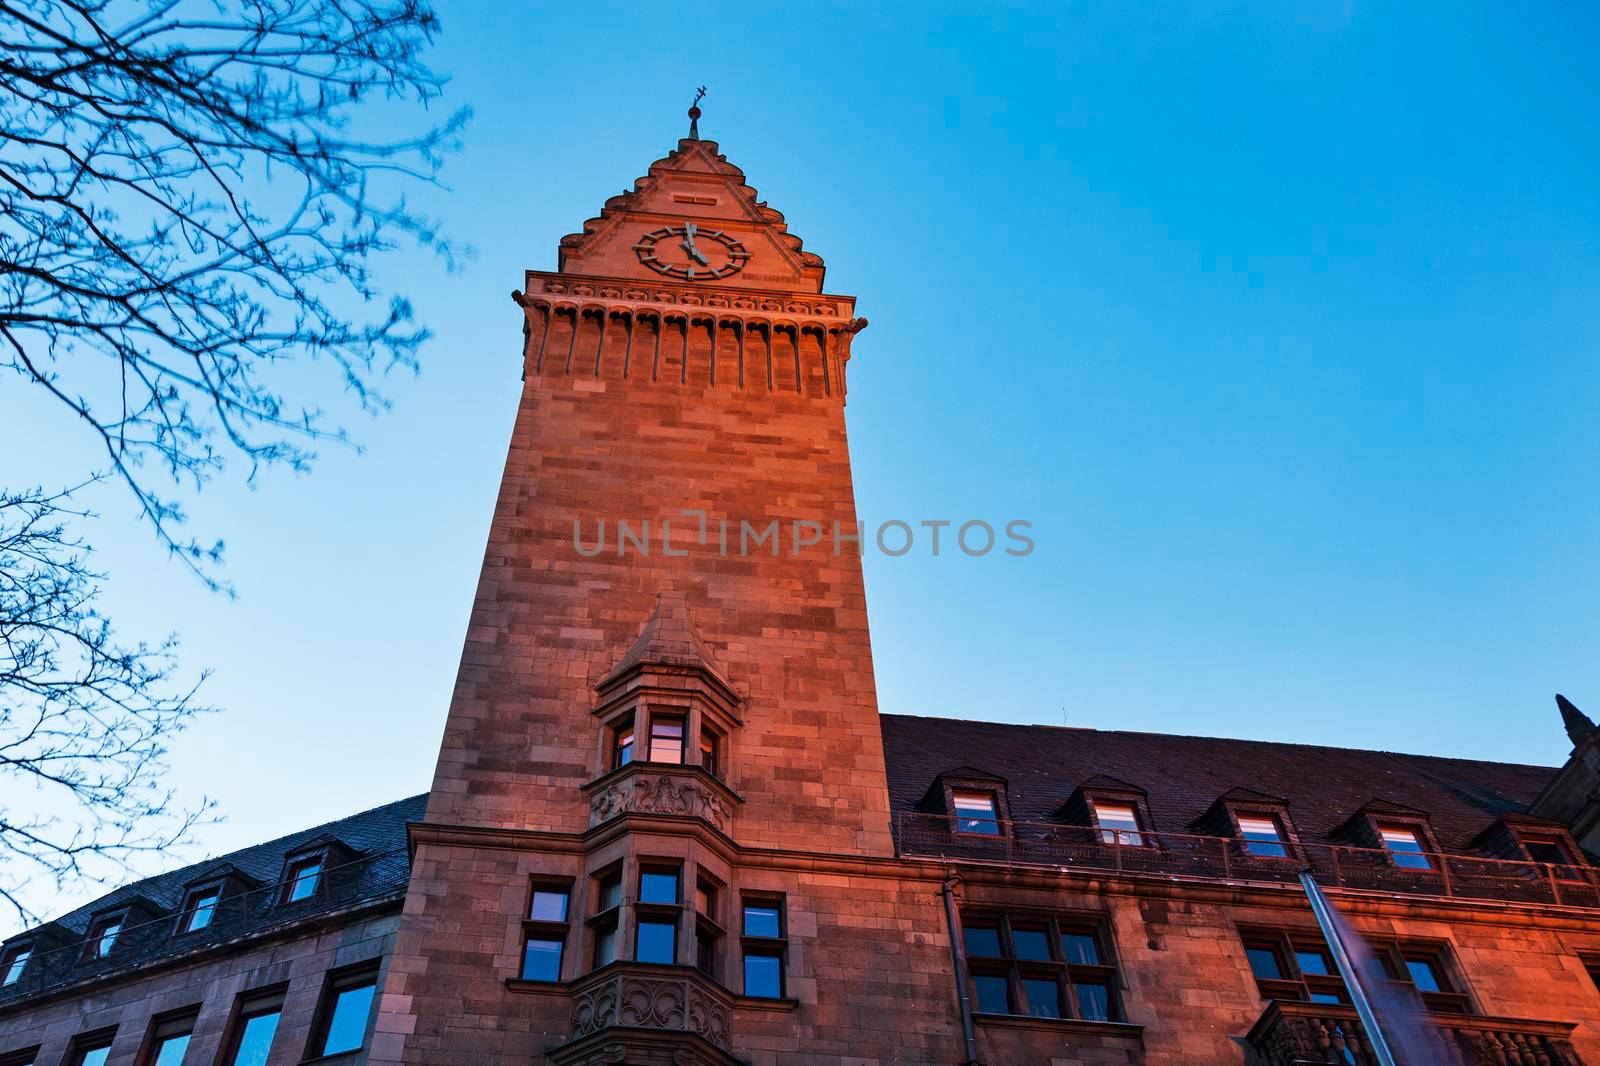 City Hall in Duisburg by benkrut